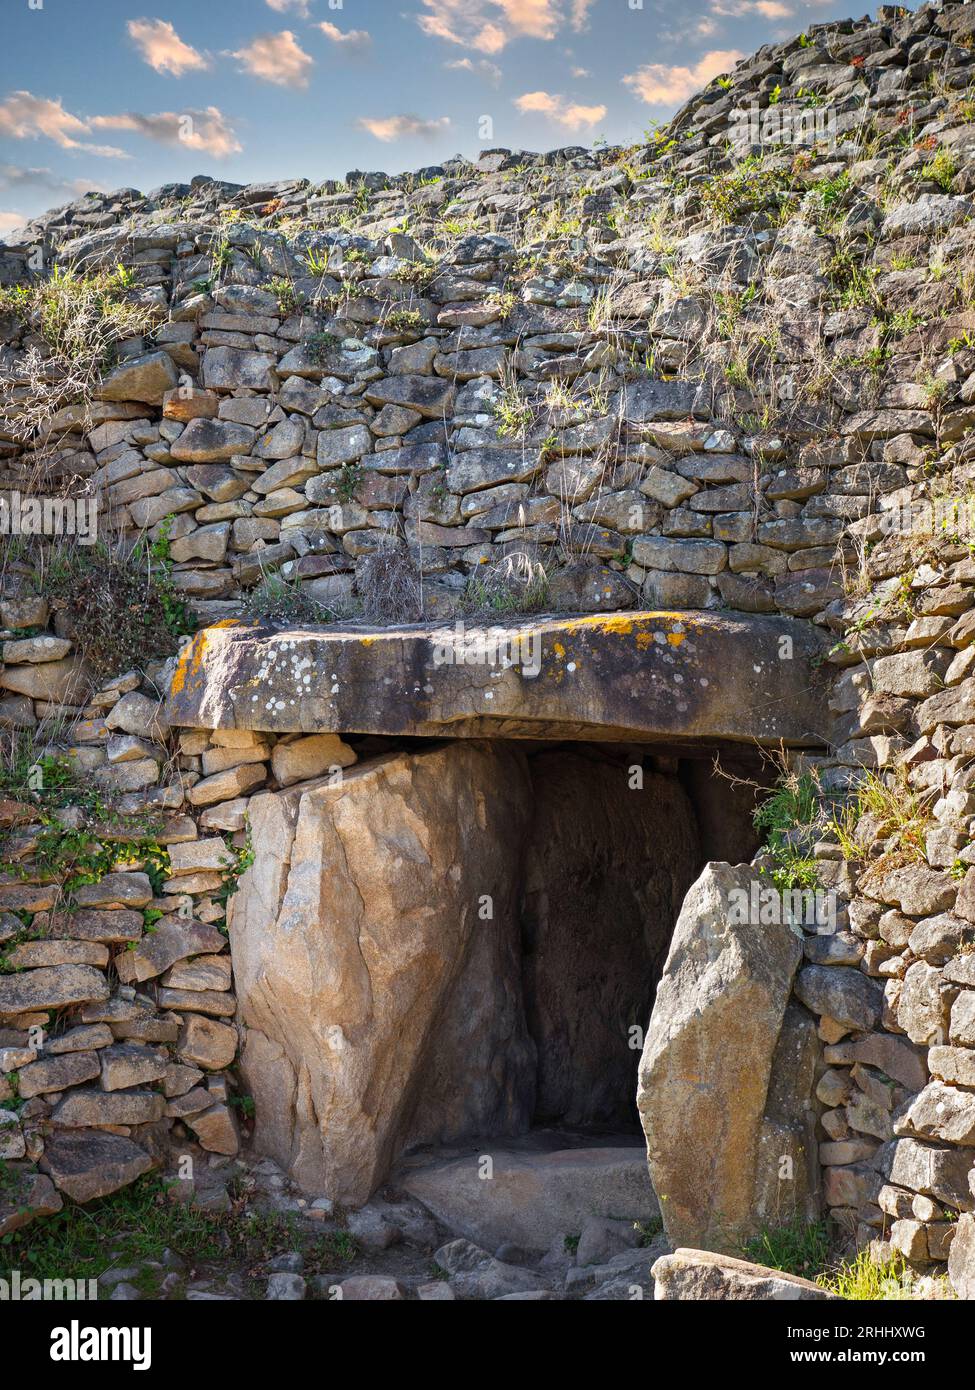 CAIRN DE GAVRINIS EXTERIOR, prehistoric cairn cave dolmen dry stone grave, with renowned symbolic & mysterious Stone Age carvings. Brittany France Stock Photo